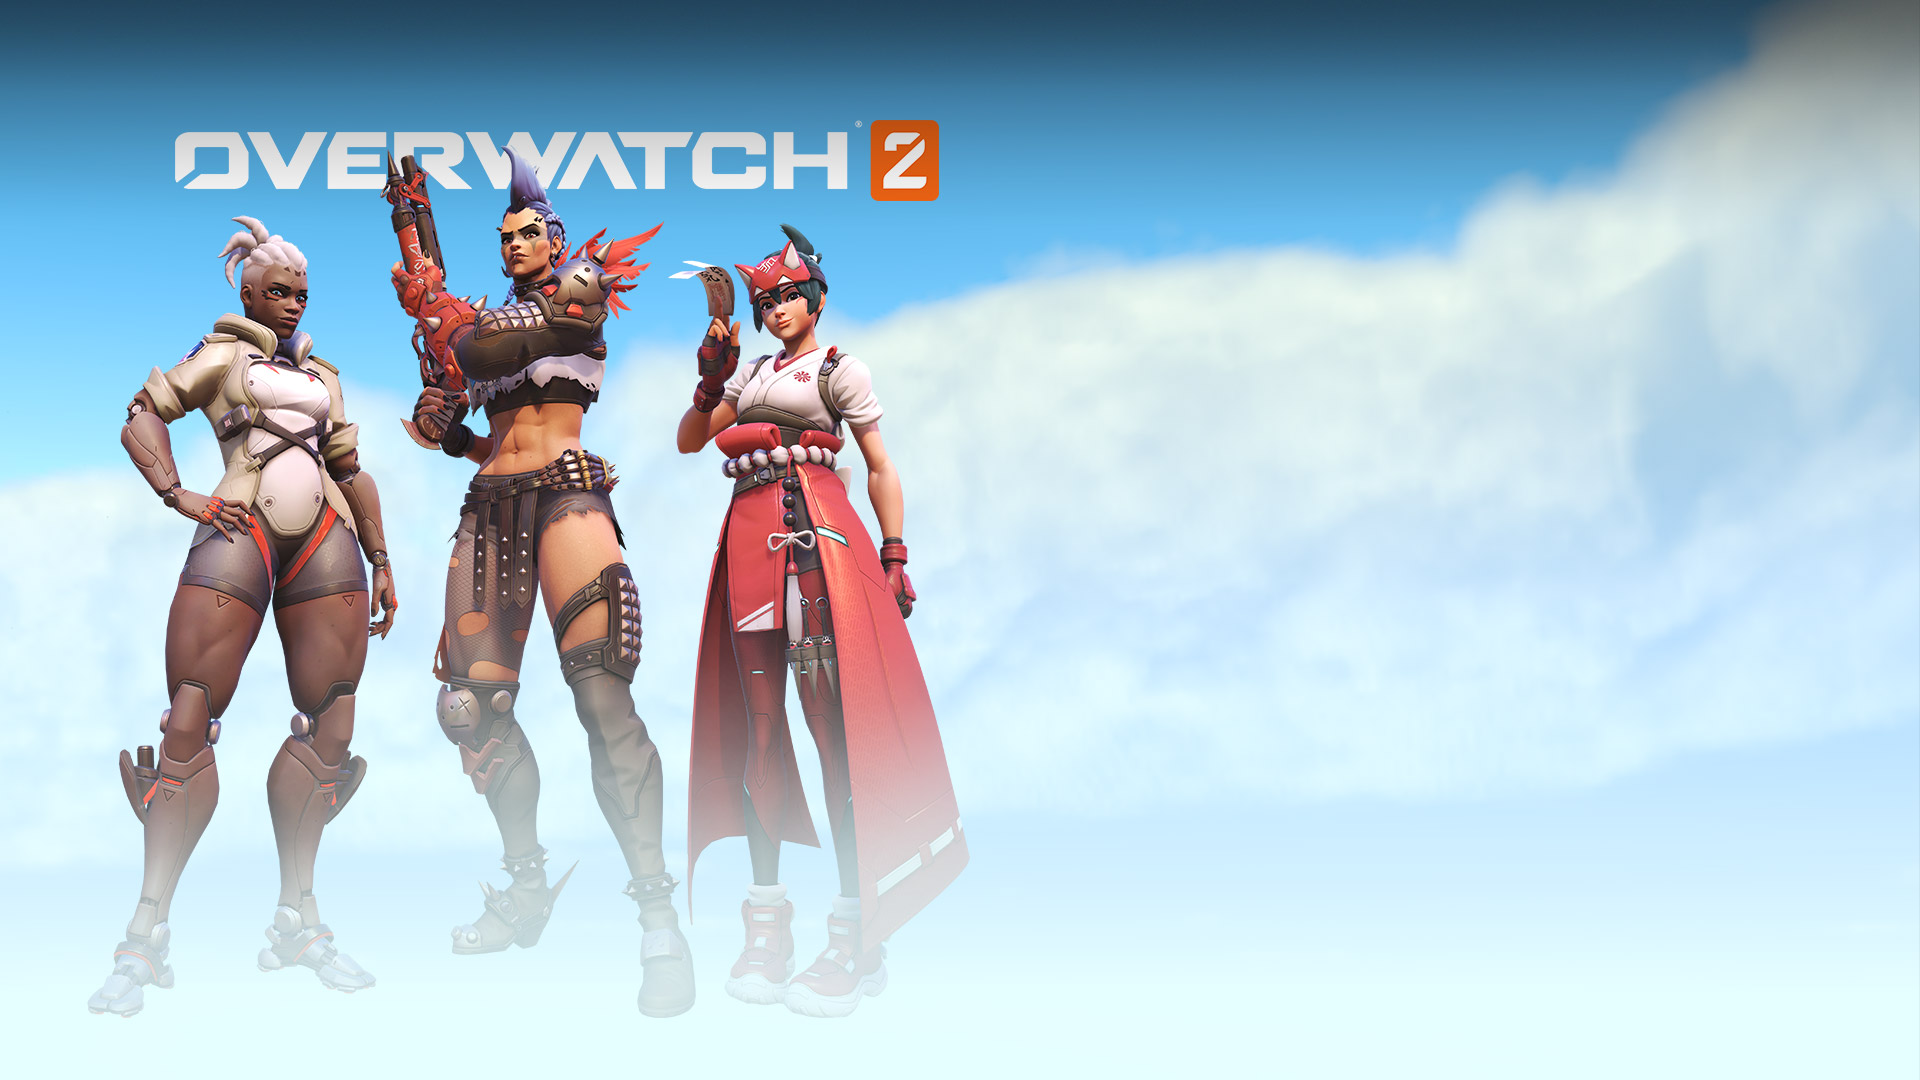 Overwatch 2, Sojourn, Junker Queen, and Kiriko pose confidently among the clouds.